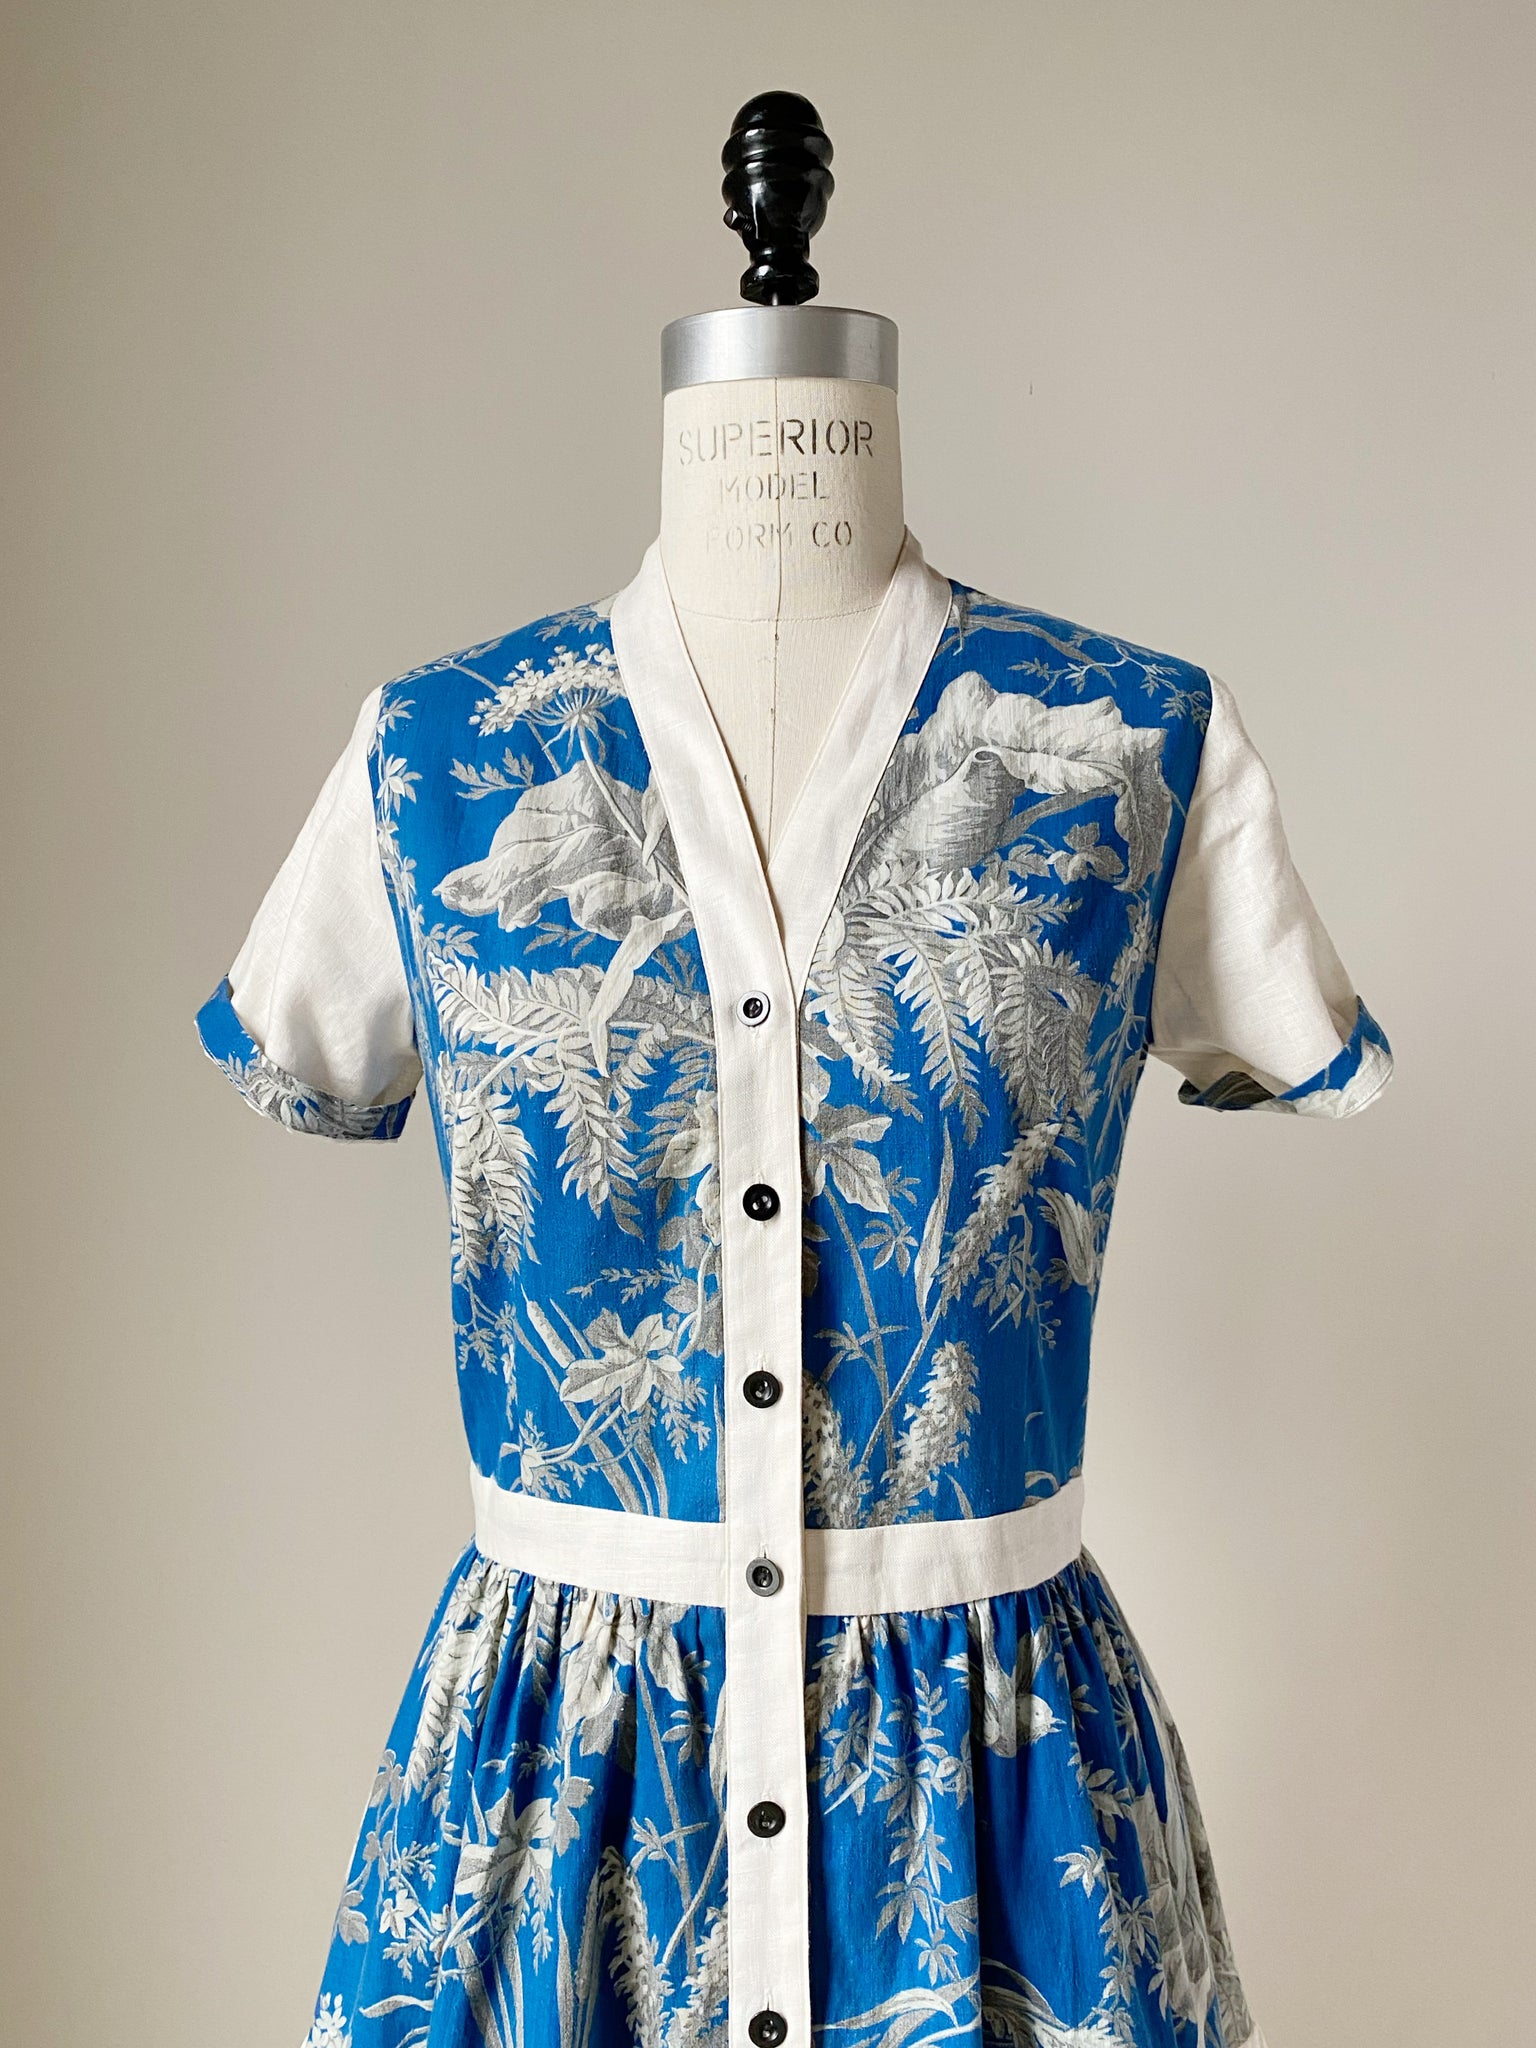 19th century blue toile patched tiered dress xs,s,m,l